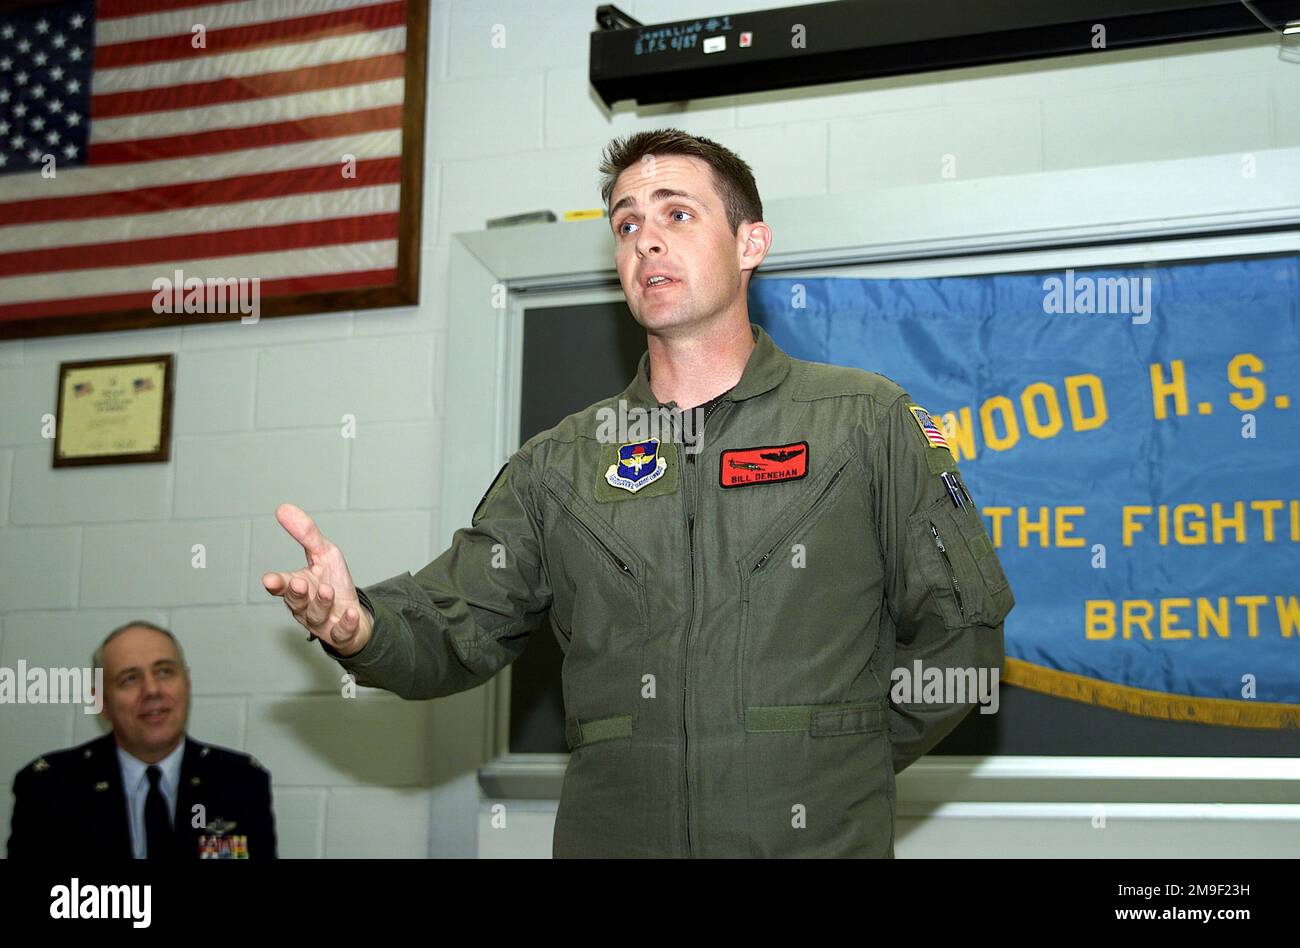 US Air Force Special Operations helicopter pilot, Captain Bill Denehen lectures to JROTC at Brentwood High School, NY on 11 May 00. On 2 May 99, while assigned with the 55th Special Operations Squadron, CPT Denehen and his crew courageously penetrated one of the most sophisticated air defense networks in the world to rescue an F-16C pilot (not shown) trapped deep inside of Serbia. This was the first mission in history where a special operations rescue force penetrated and successfully defeated an active integrated air defense system of a determined military. During Operation Allied Force, Dene Stock Photo